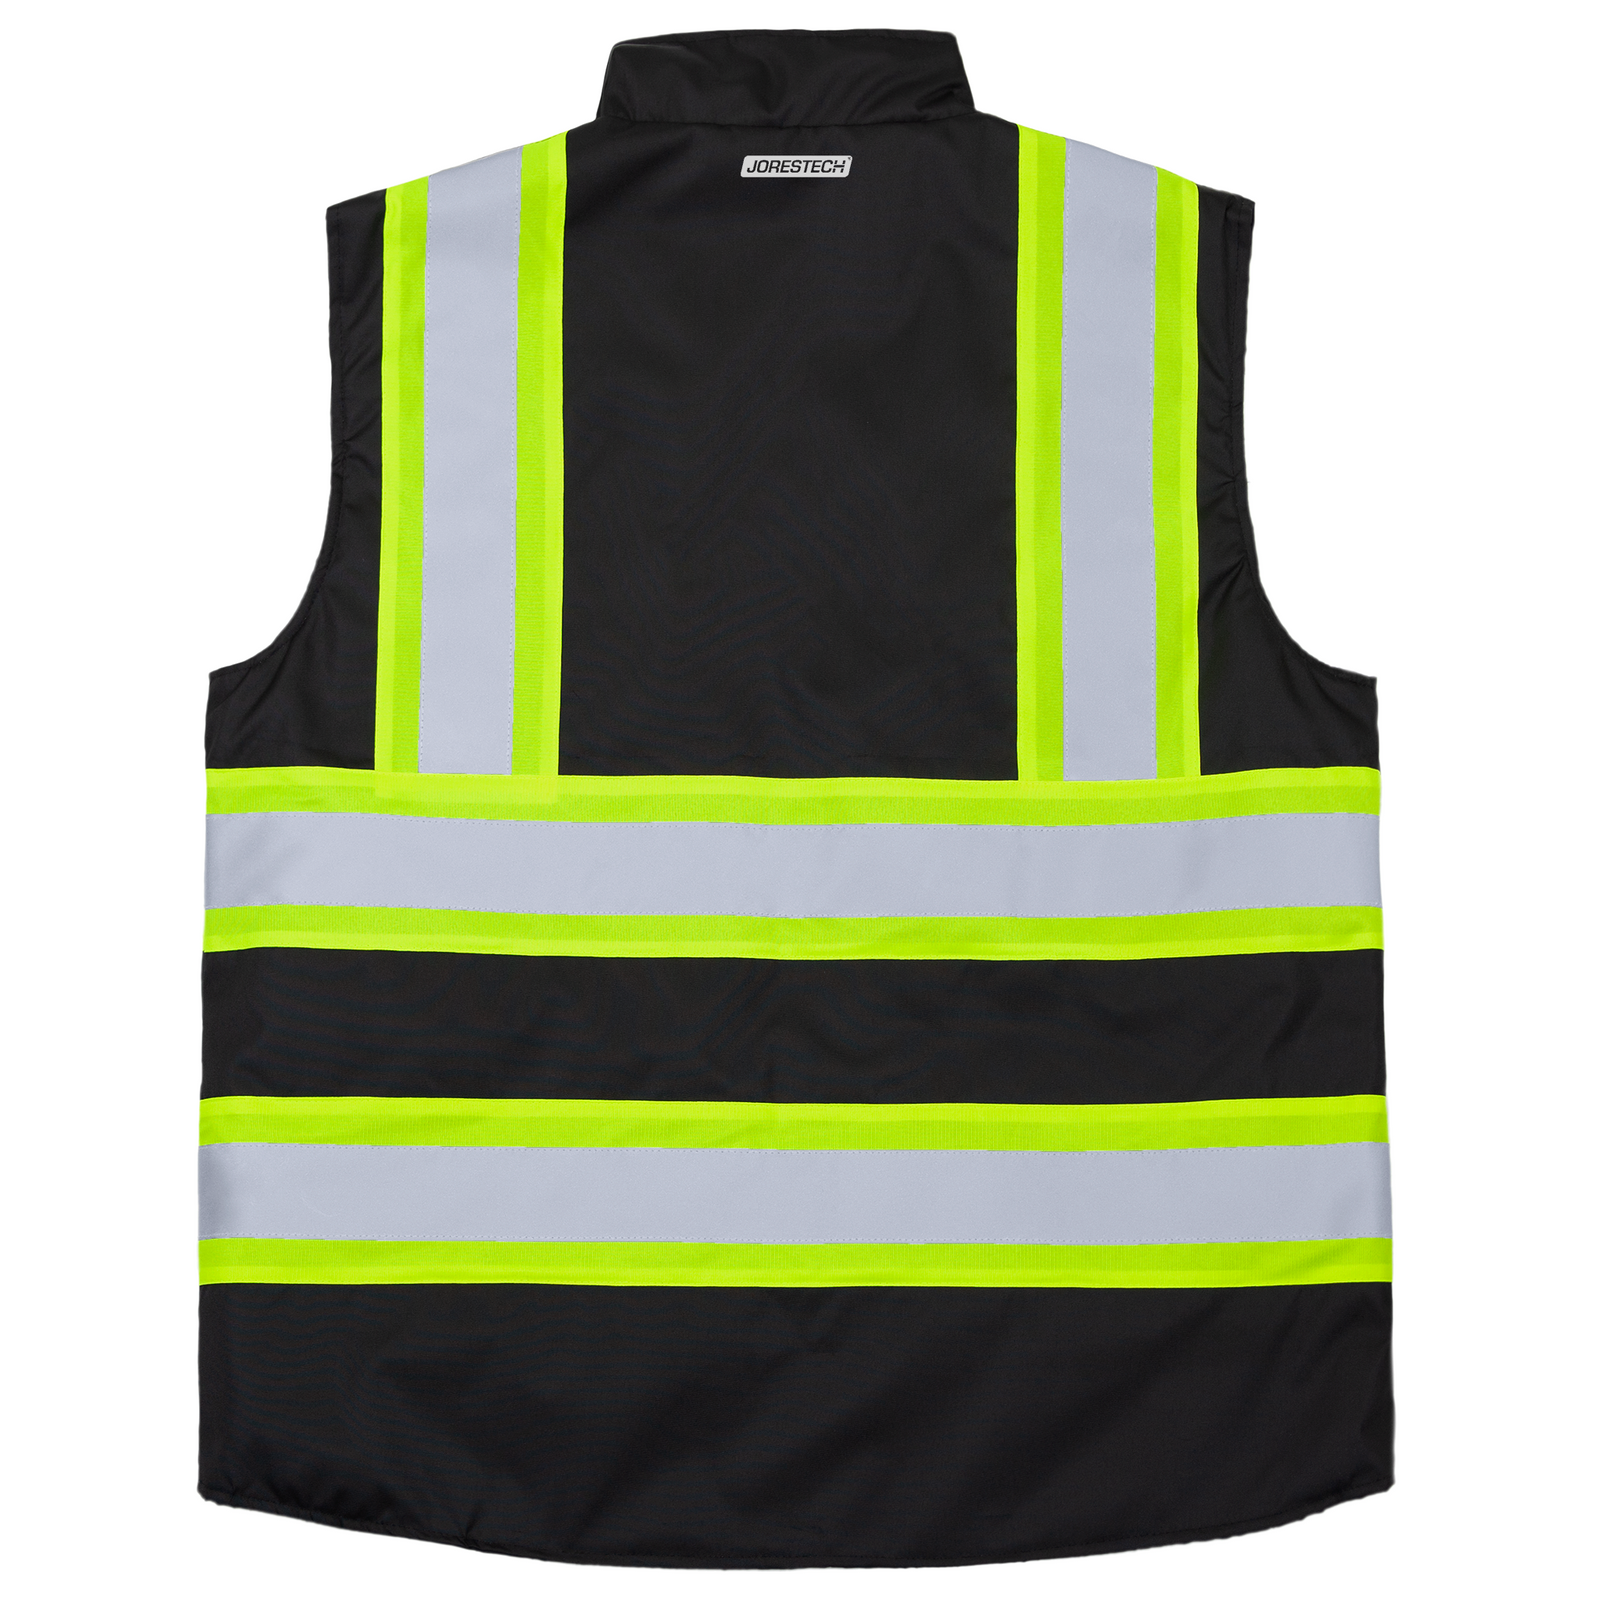 Back view of the JORESTECH® reflective black reversible insulated reflective safety vest